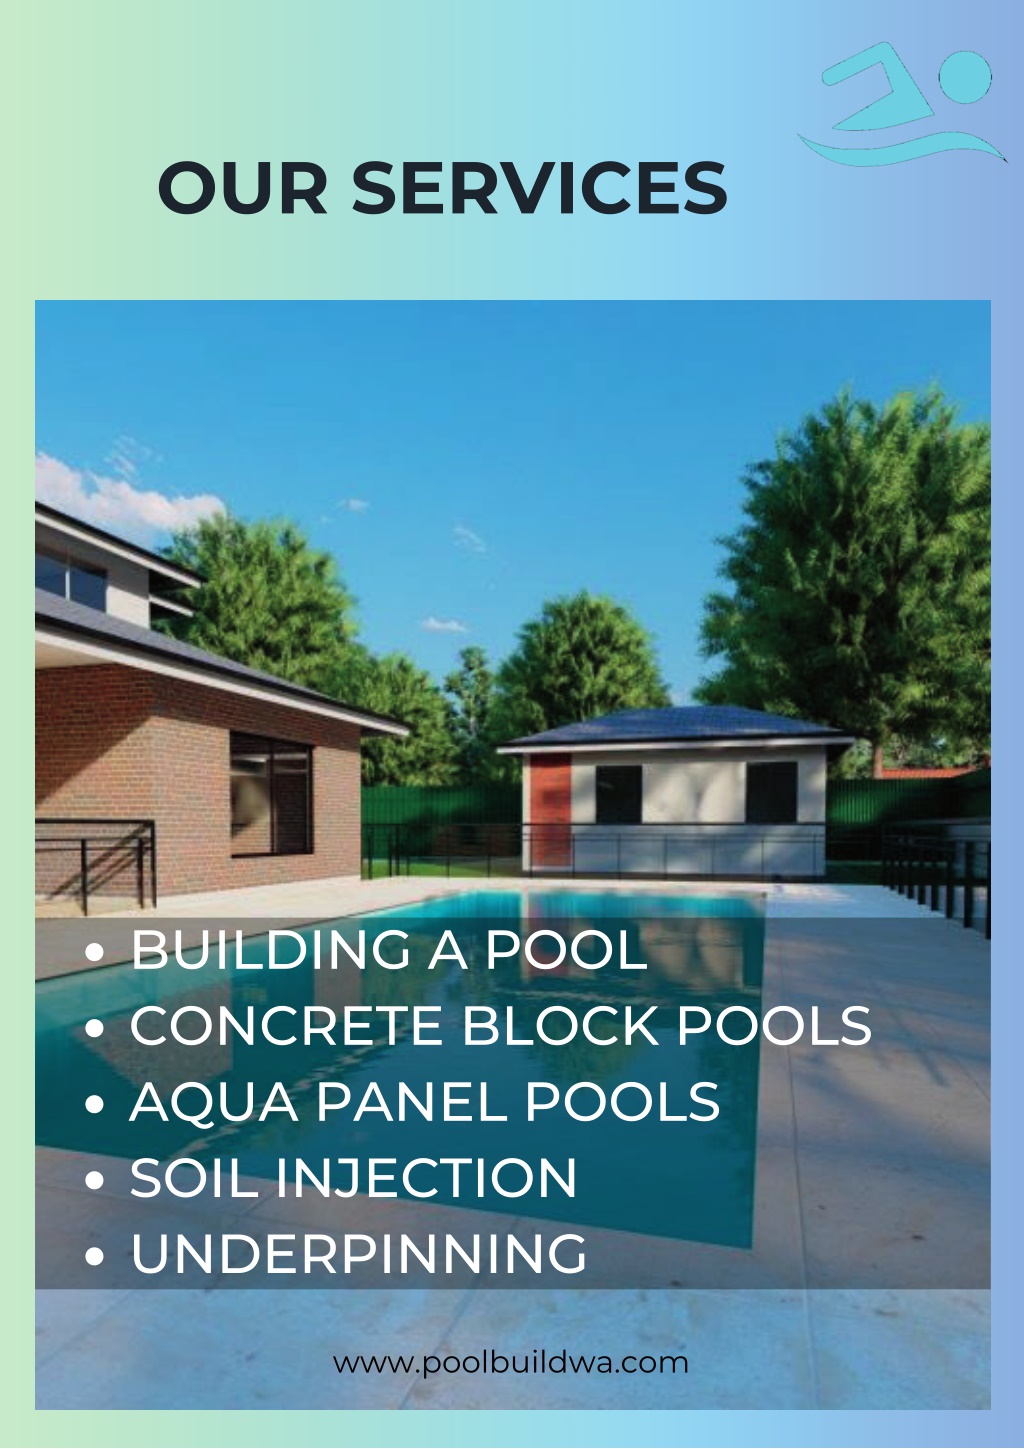 Ppt Best Swimming Pool Installation Perth Poolbuildwa Powerpoint Presentation Id12307892